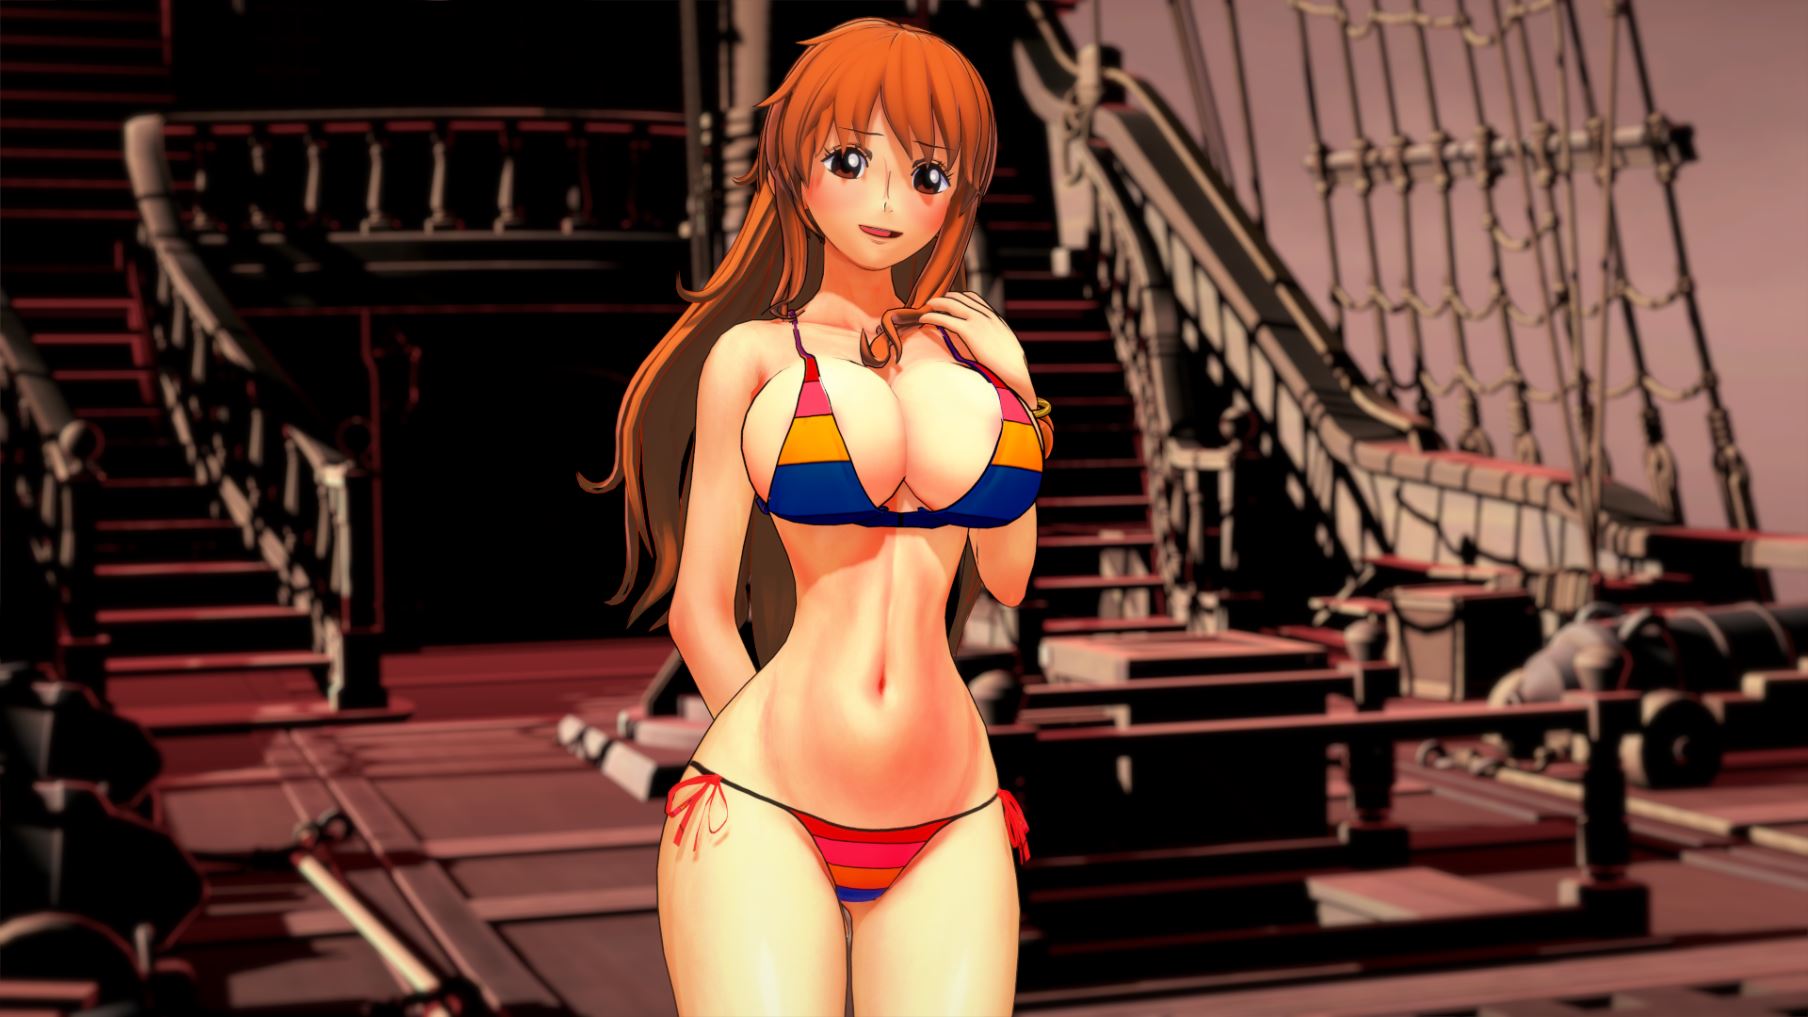 Ren'Py] One Piece: Lost at Sea - v0.1a by Dochino 18+ Adult xxx Porn Game  Download